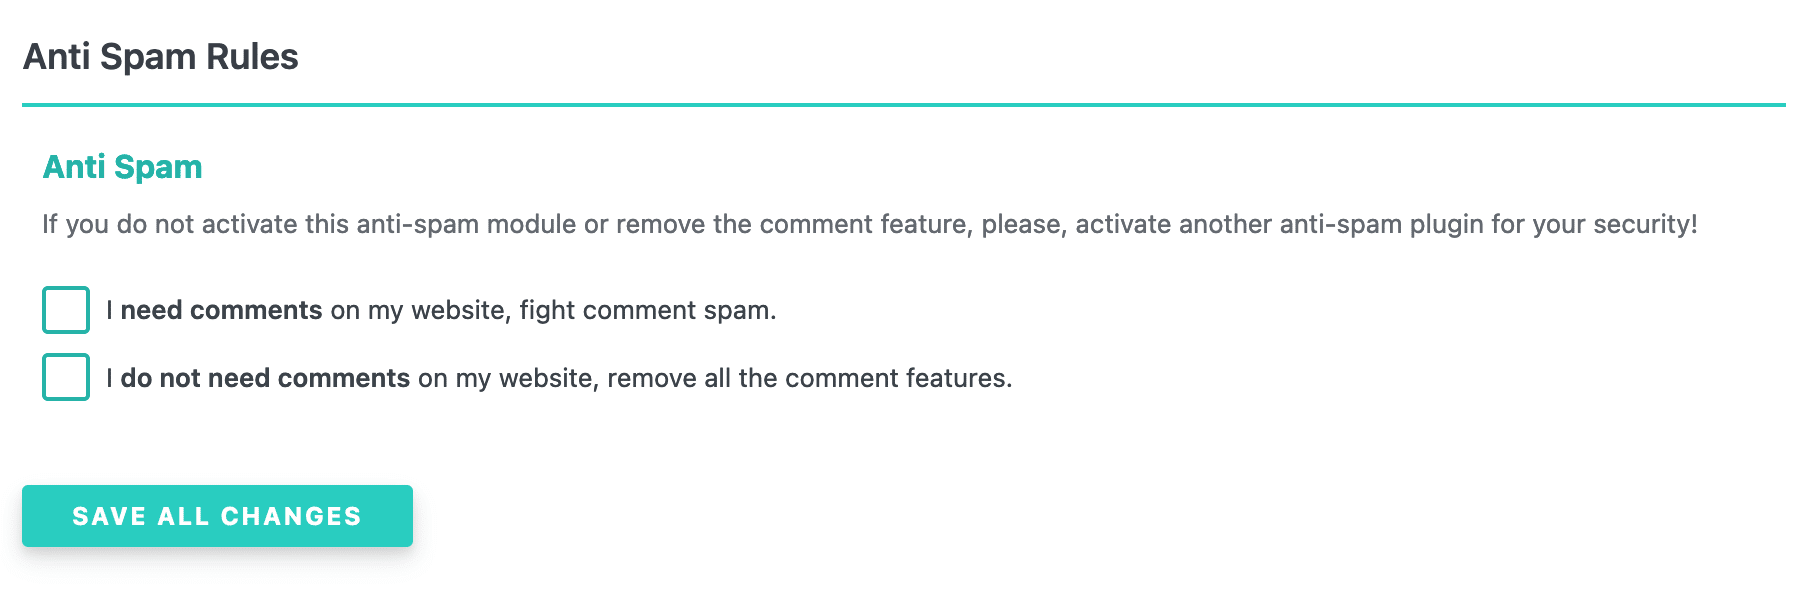 SecuPress allows you to block spam comments.